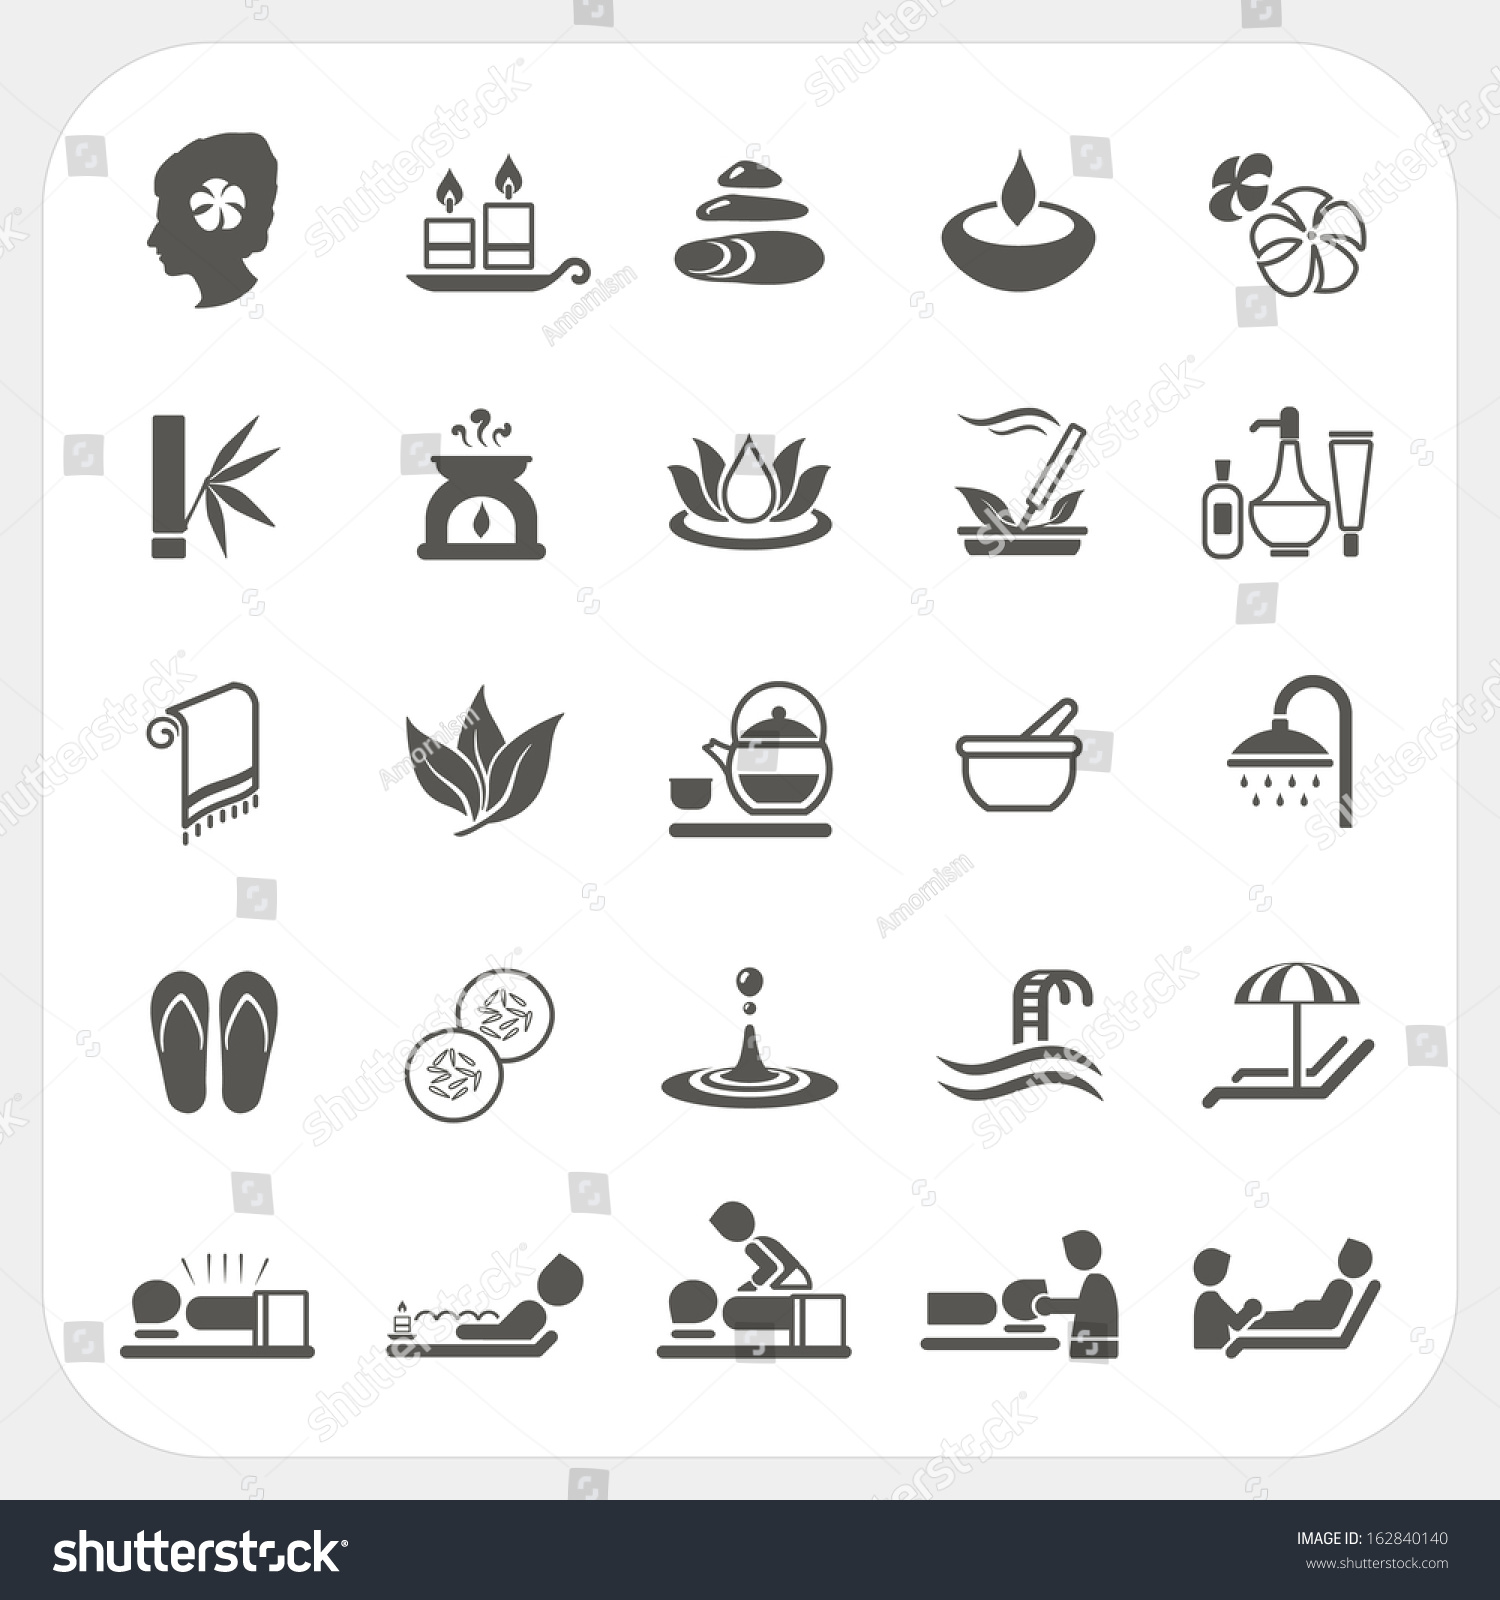 Spa And Massage Icons Set Stock Vector Illustration 162840140 Shutterstock 